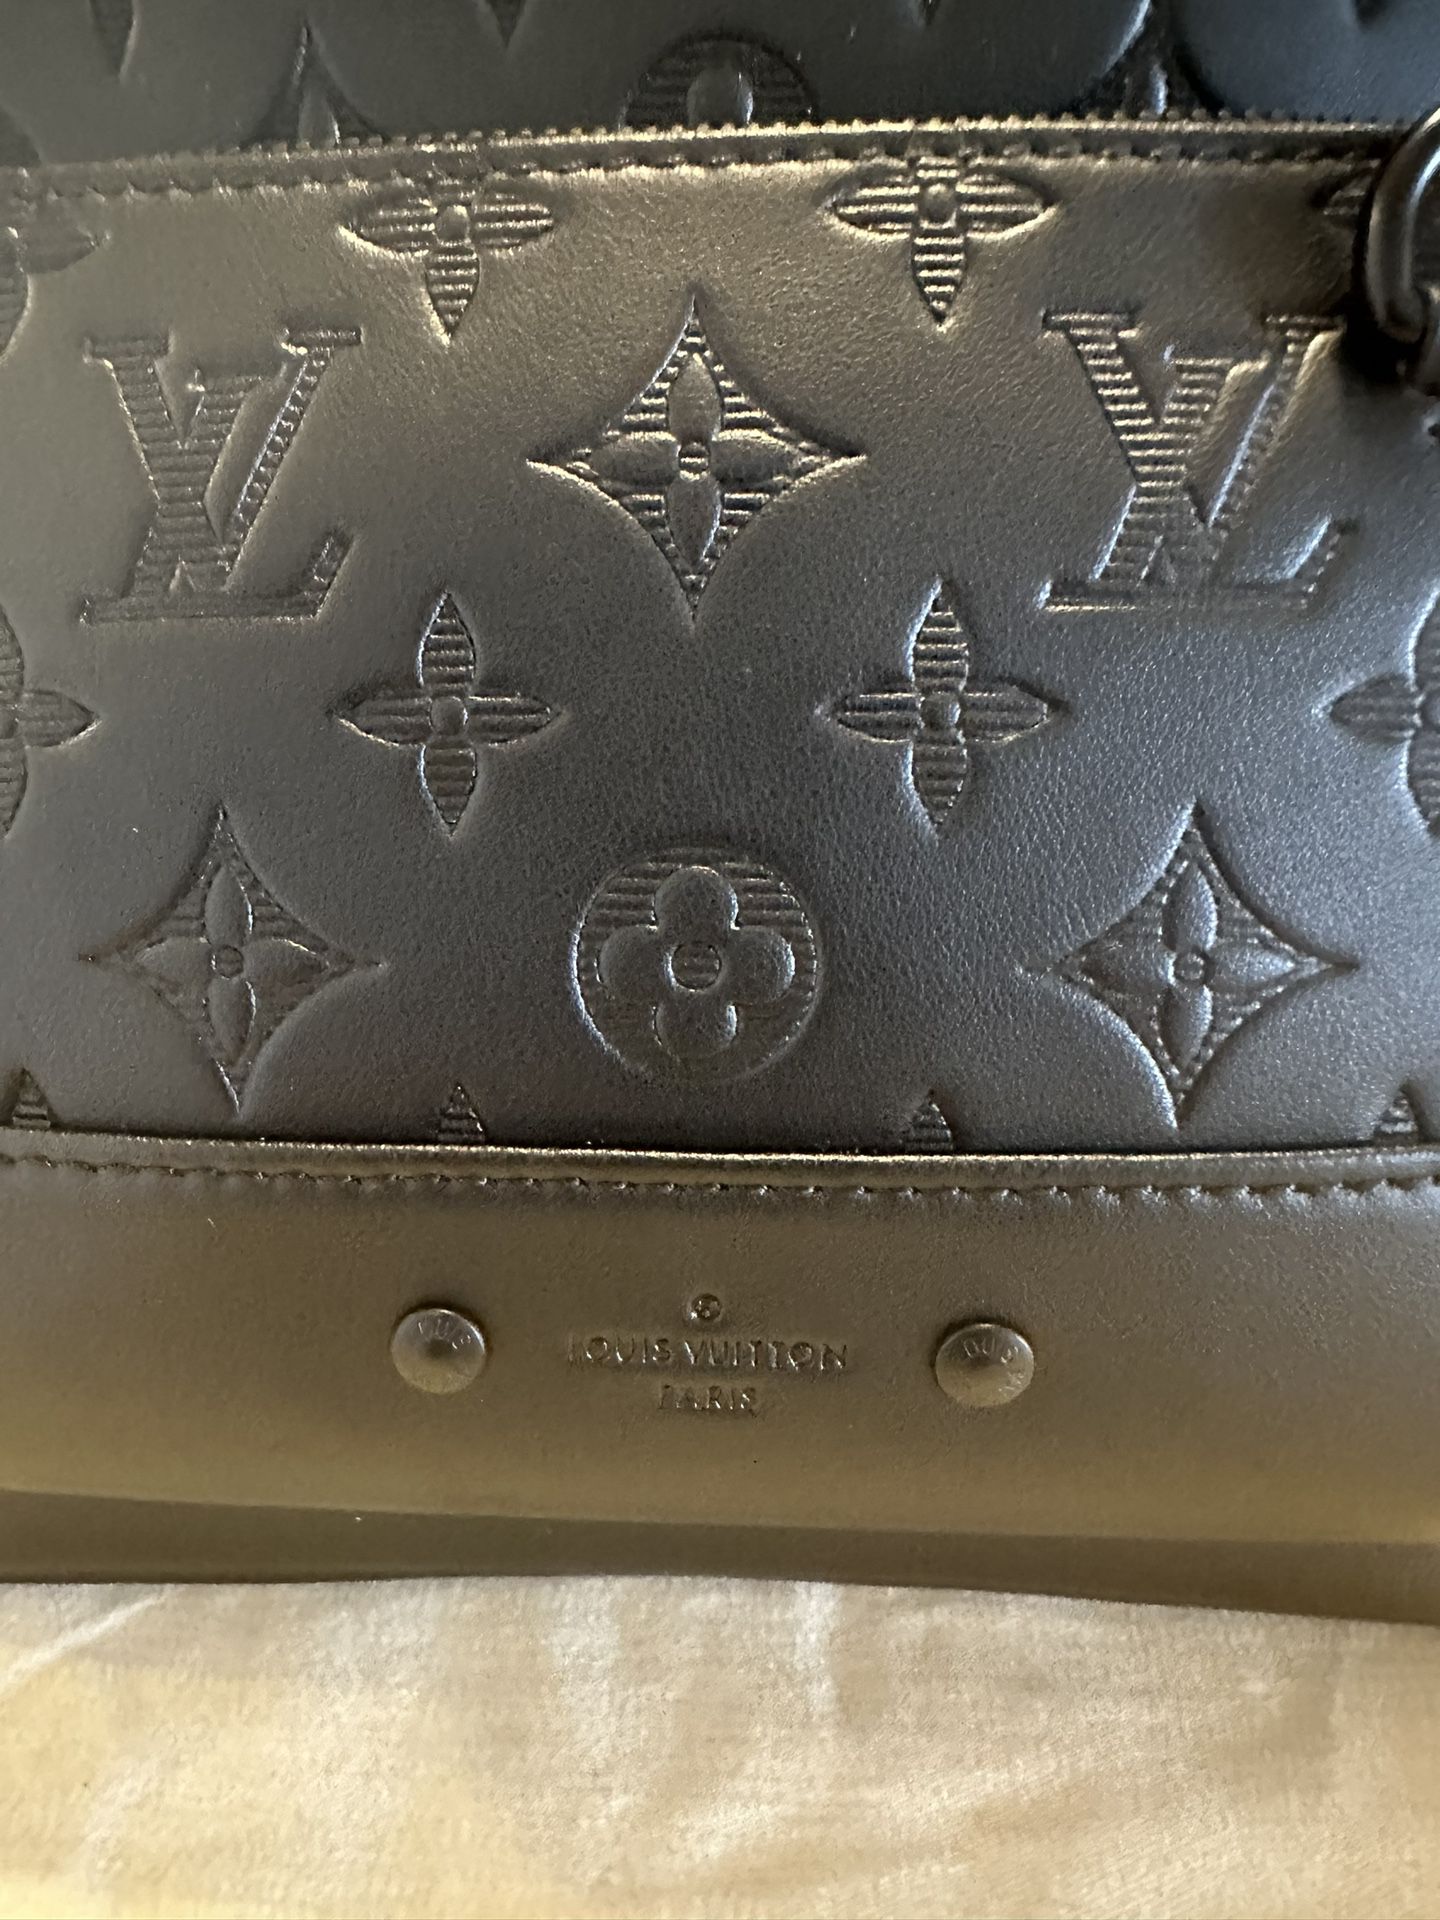 Louis Vuitton Milla Bag for Sale in Los Angeles, CA - OfferUp